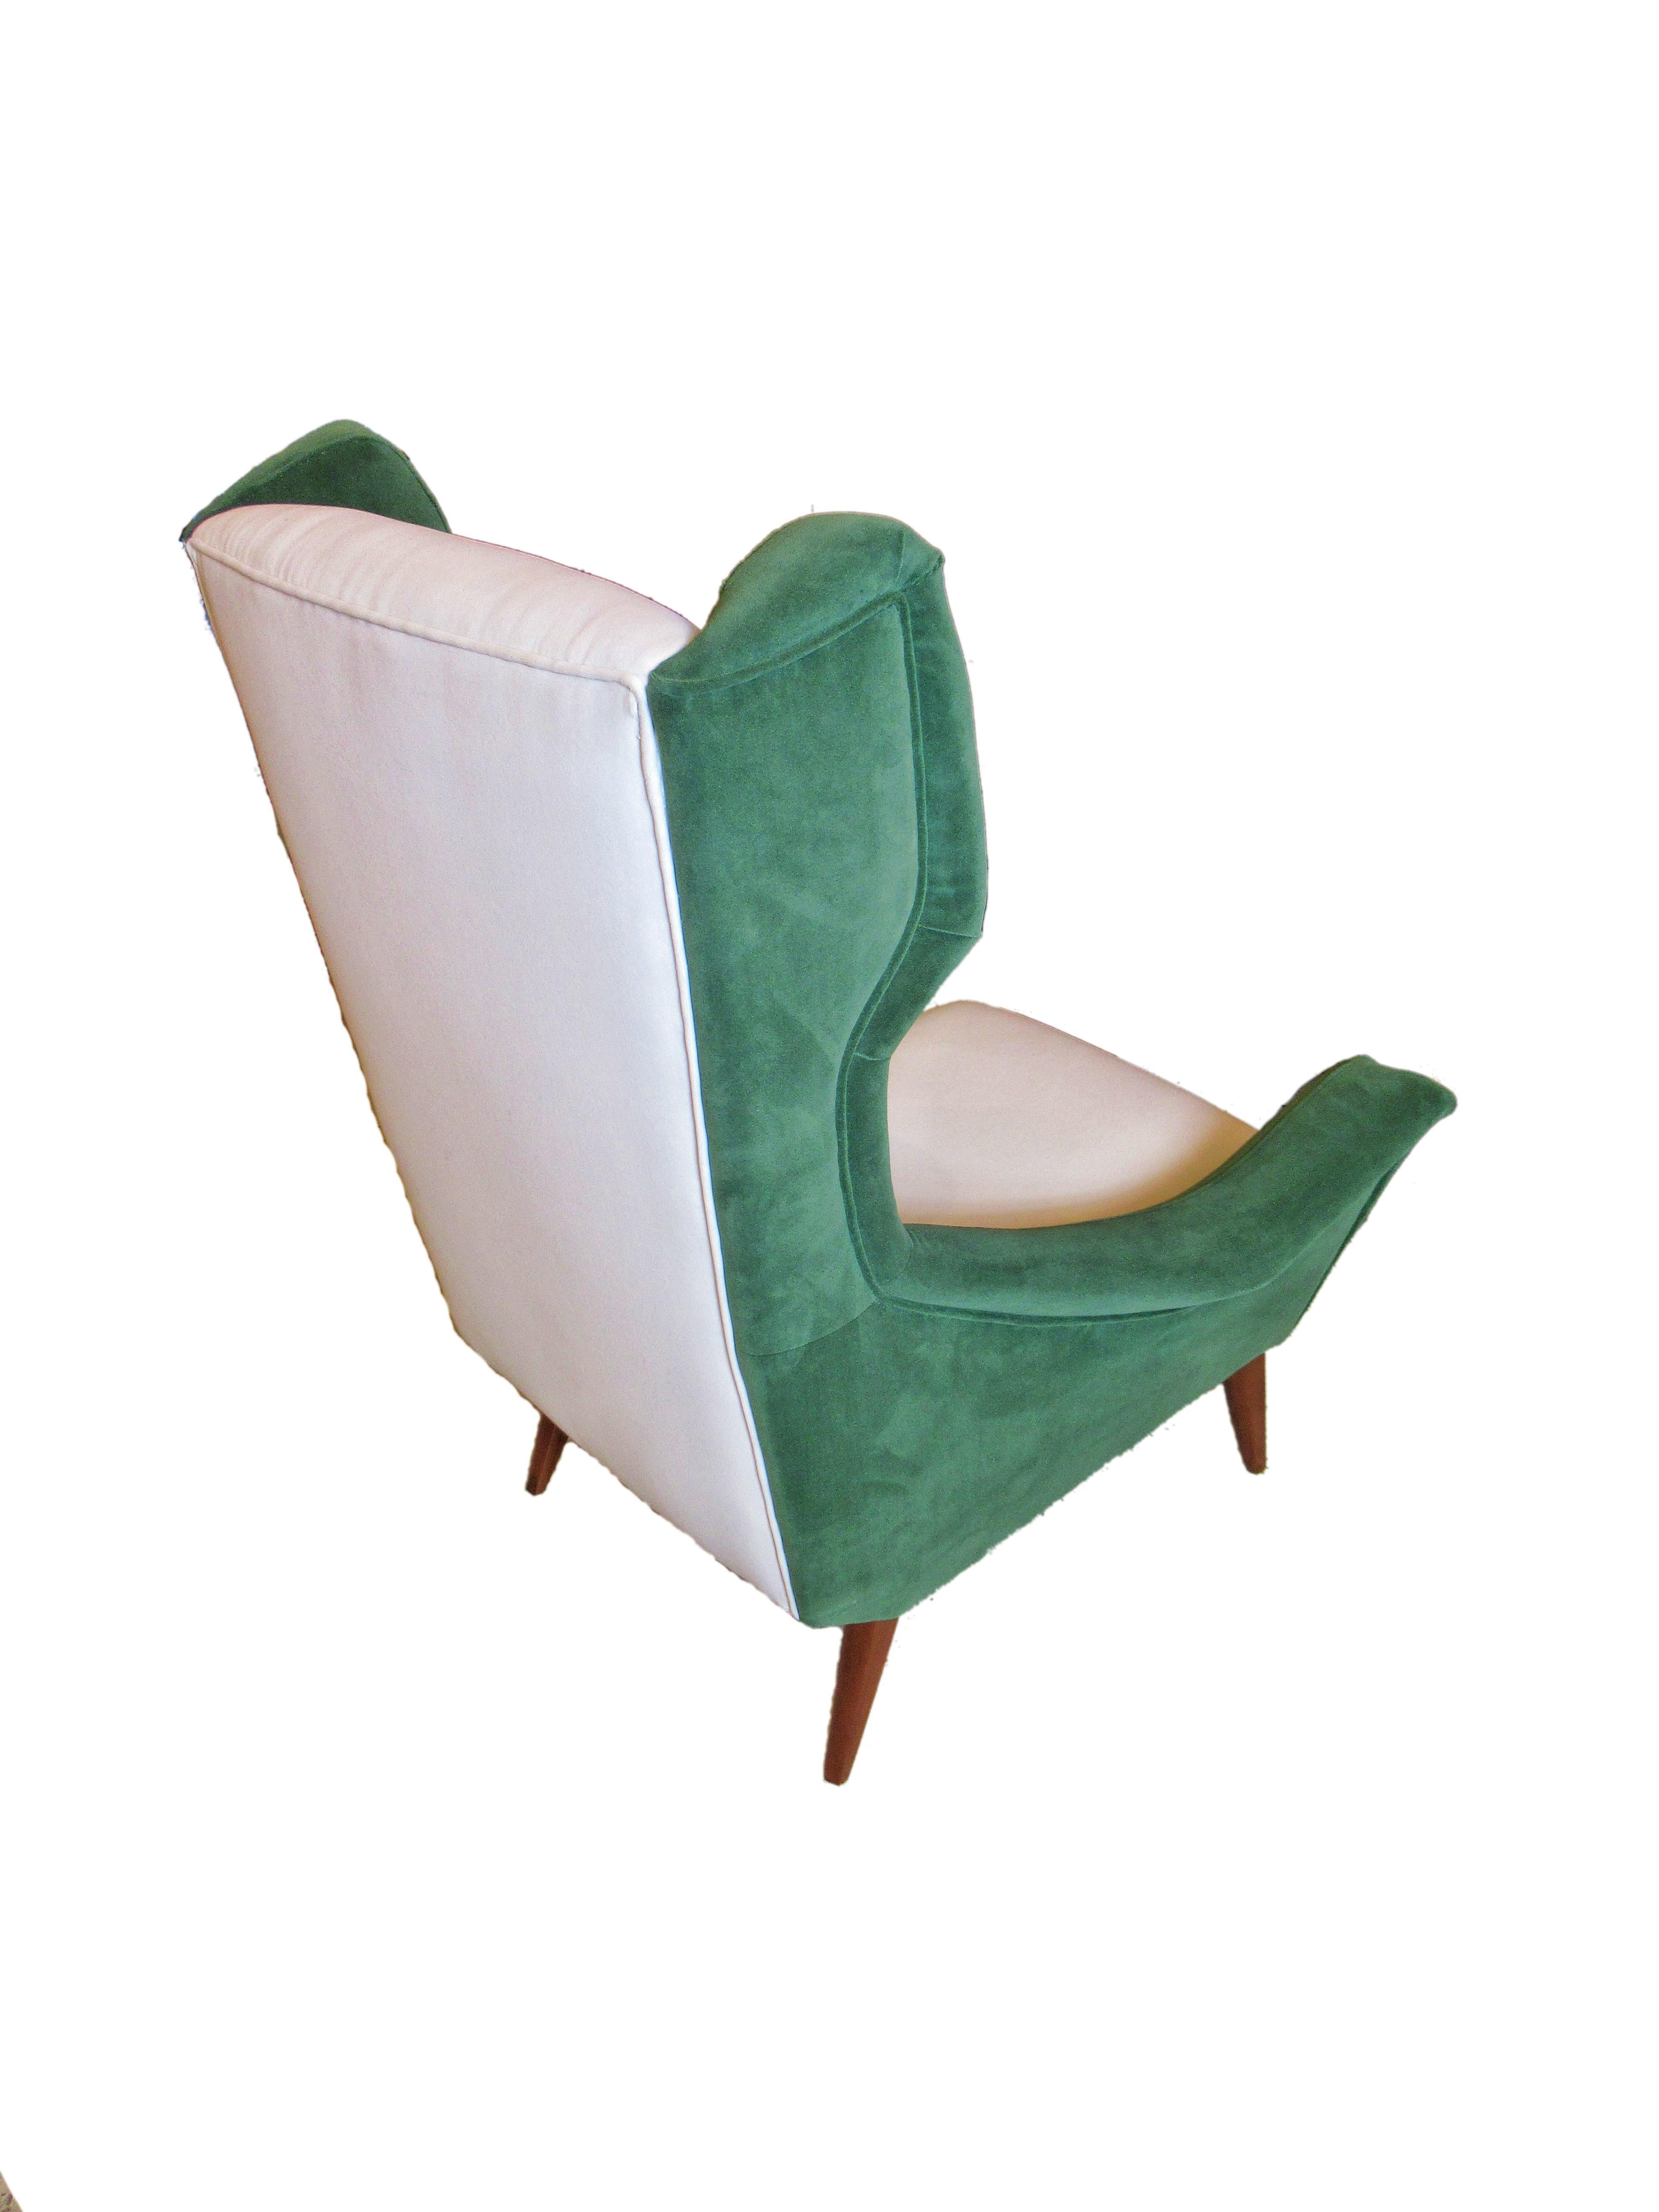 Italian Modern Upholstered Wing Chair, Gio Ponti, 1950's For Sale 1